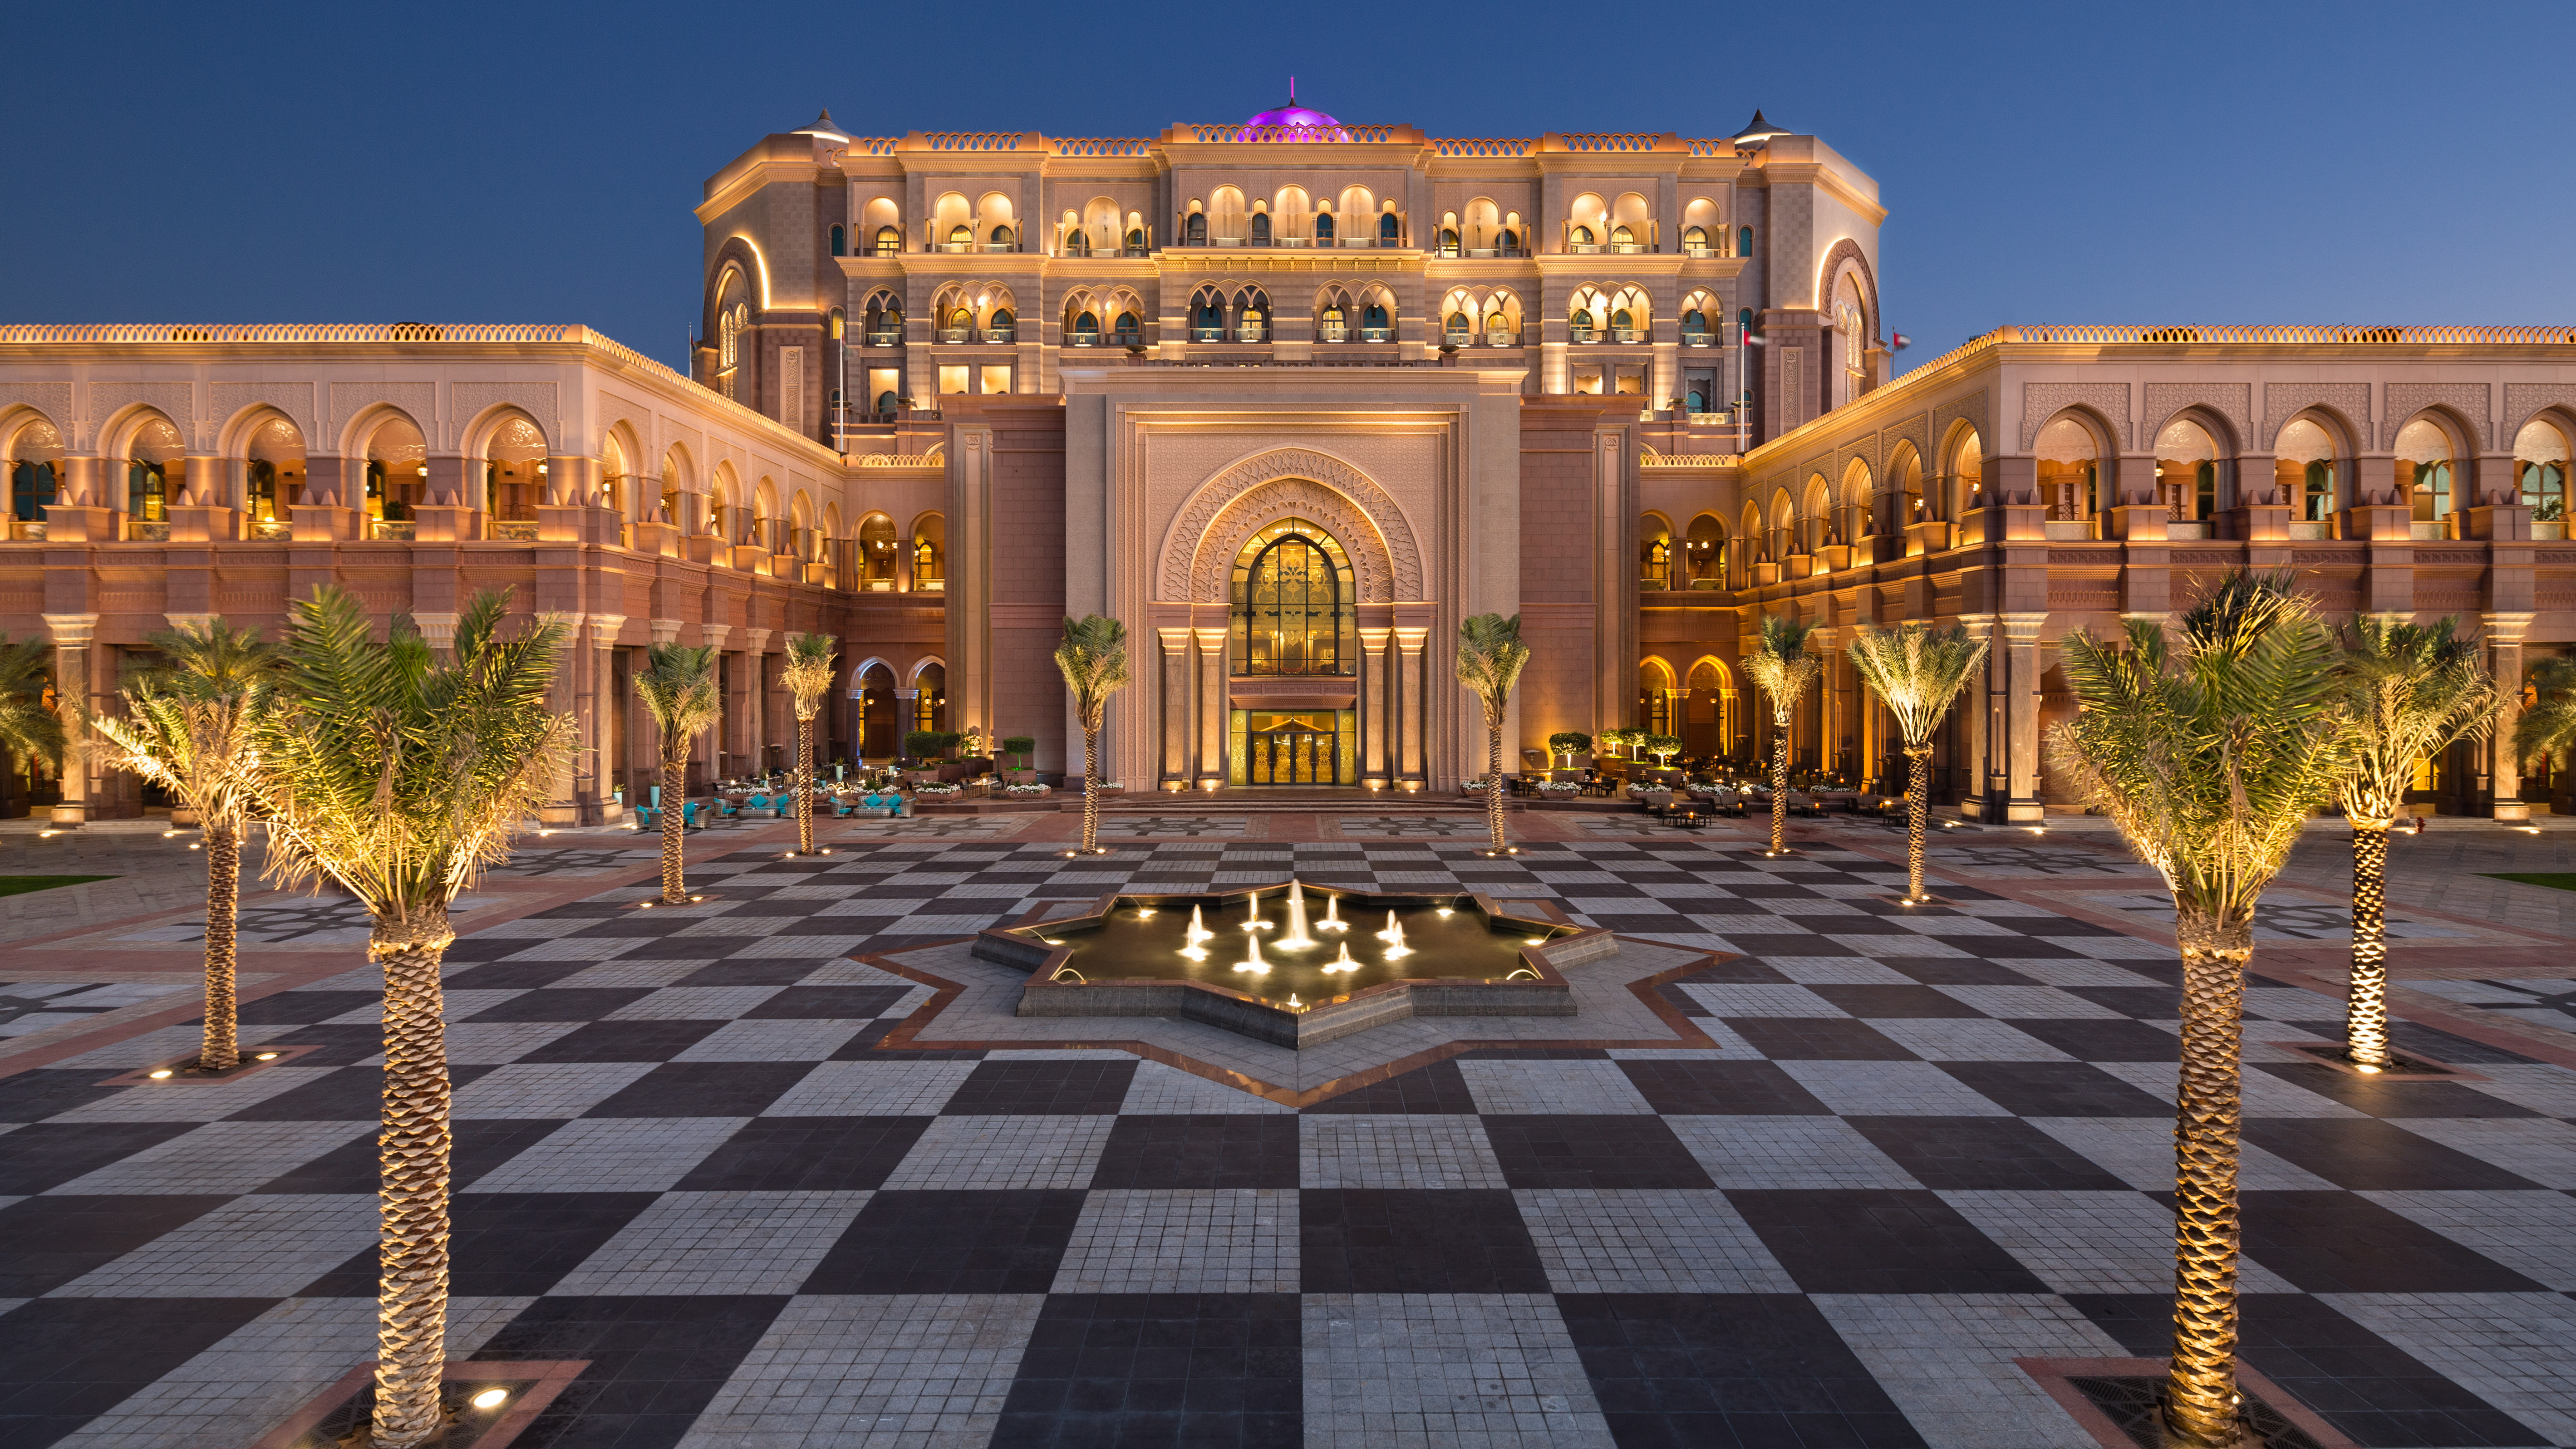 Spend the night at Emirates Palace